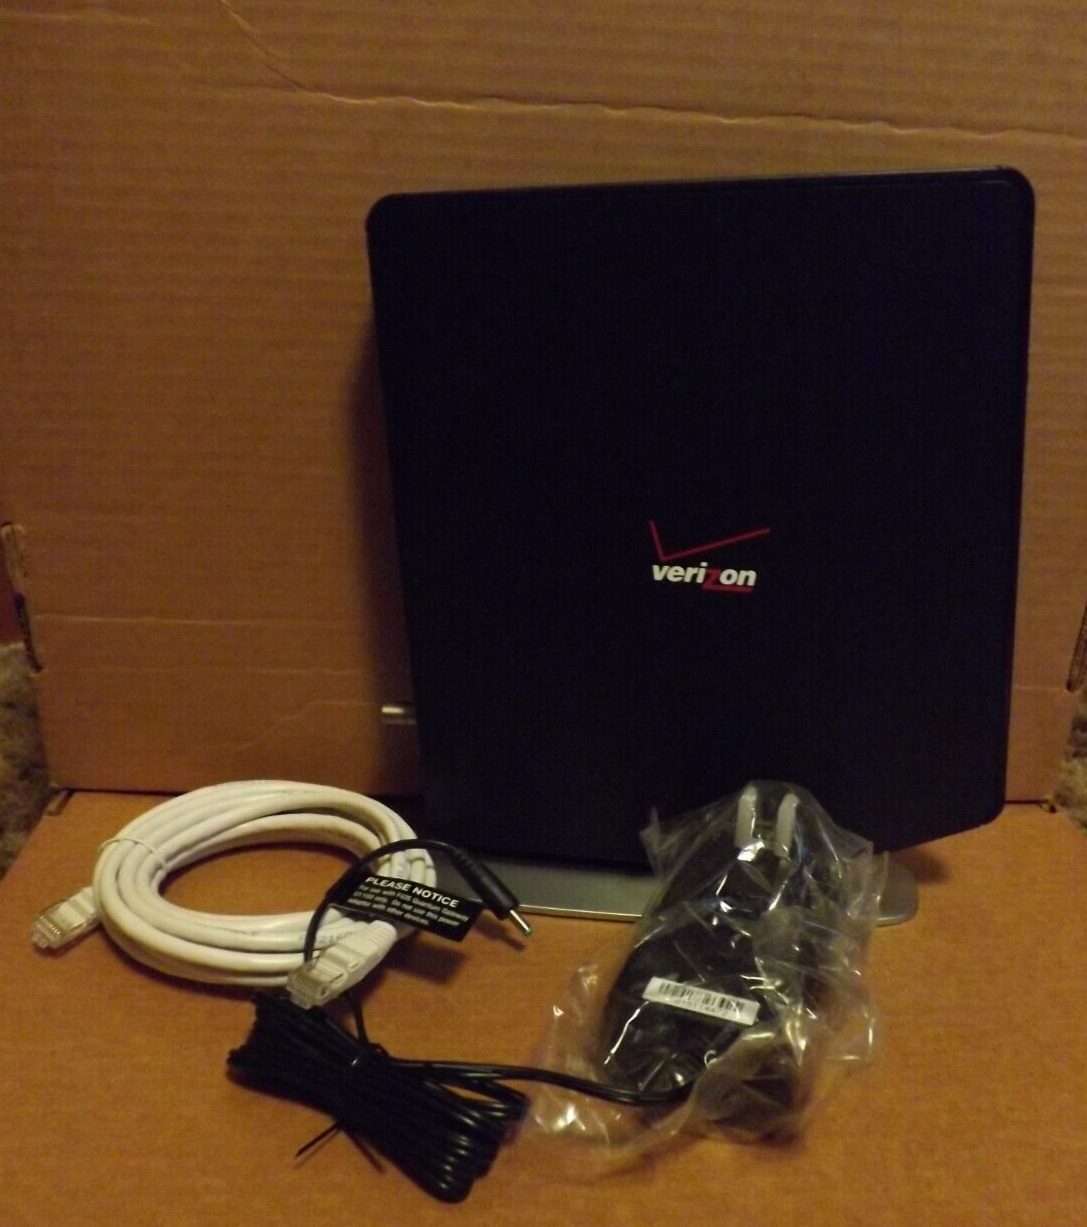 VERIZON FIOS G1100 DUAL BAND ROUTER BRAND NEW IN BOX, NEVER USED